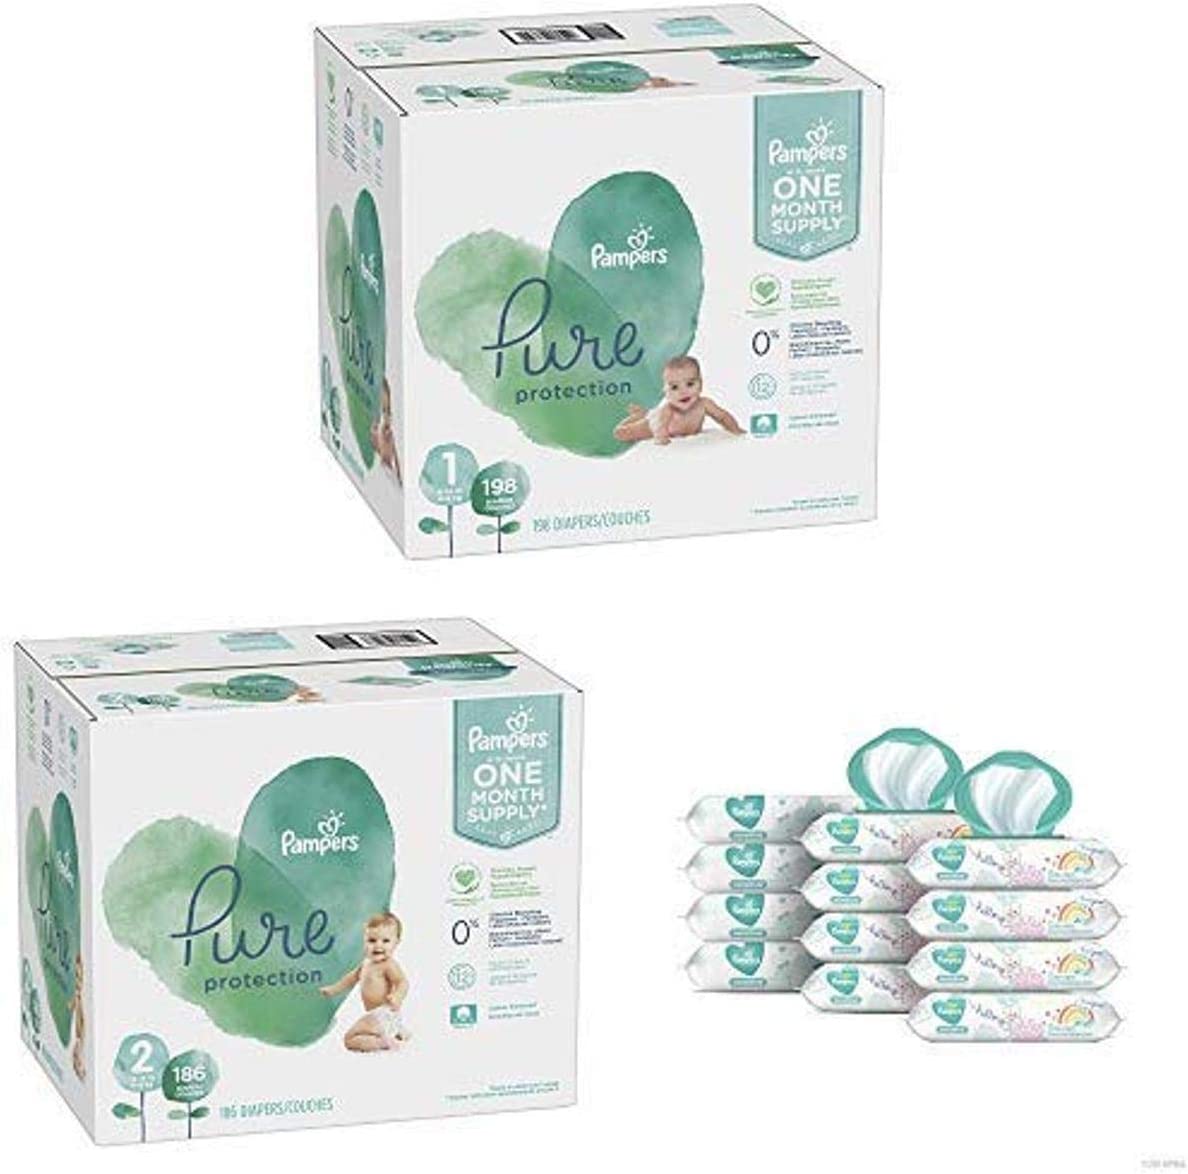 Pampers Bundle – Pure Disposable Baby Diapers Sizes 1, 198 Count & 2, 186 Count with Pampers Sensitive Water-Based Baby Wipes, 12 Pop-Top and Refill Combo Packs, 864 Count